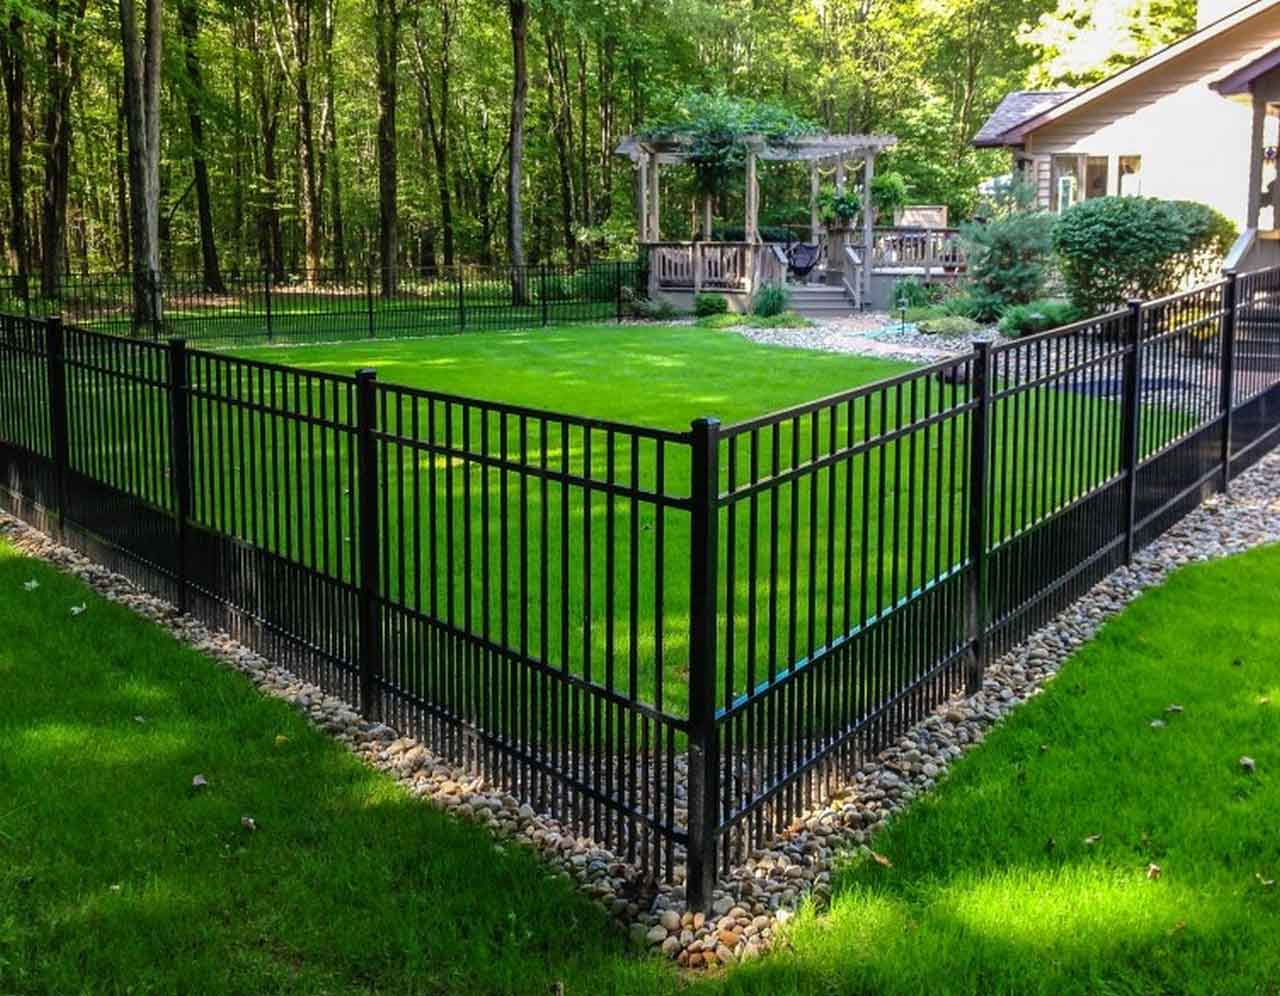 Backyard Fence Options For Dogs Yard Fence Ideas For Dogs Backyard Dog Fencing Ideas 